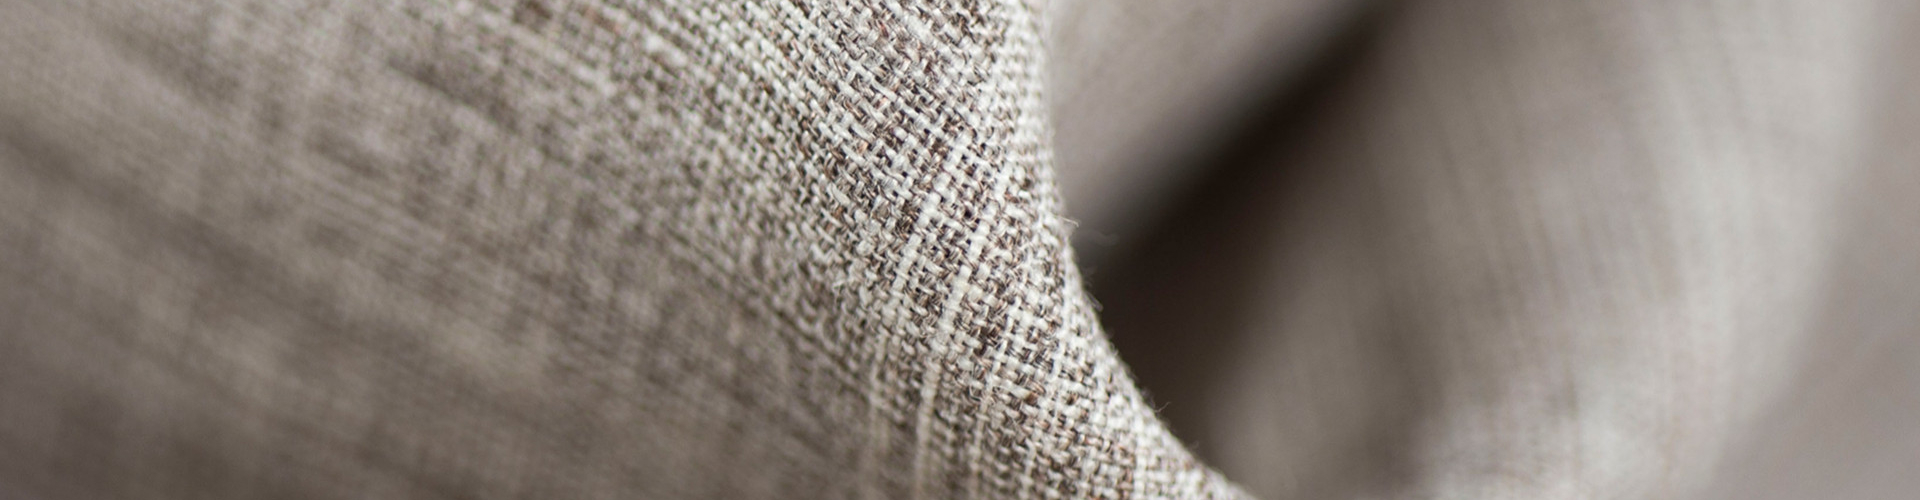 Carnet’s offer expands with a range of eco-friendly fabrics